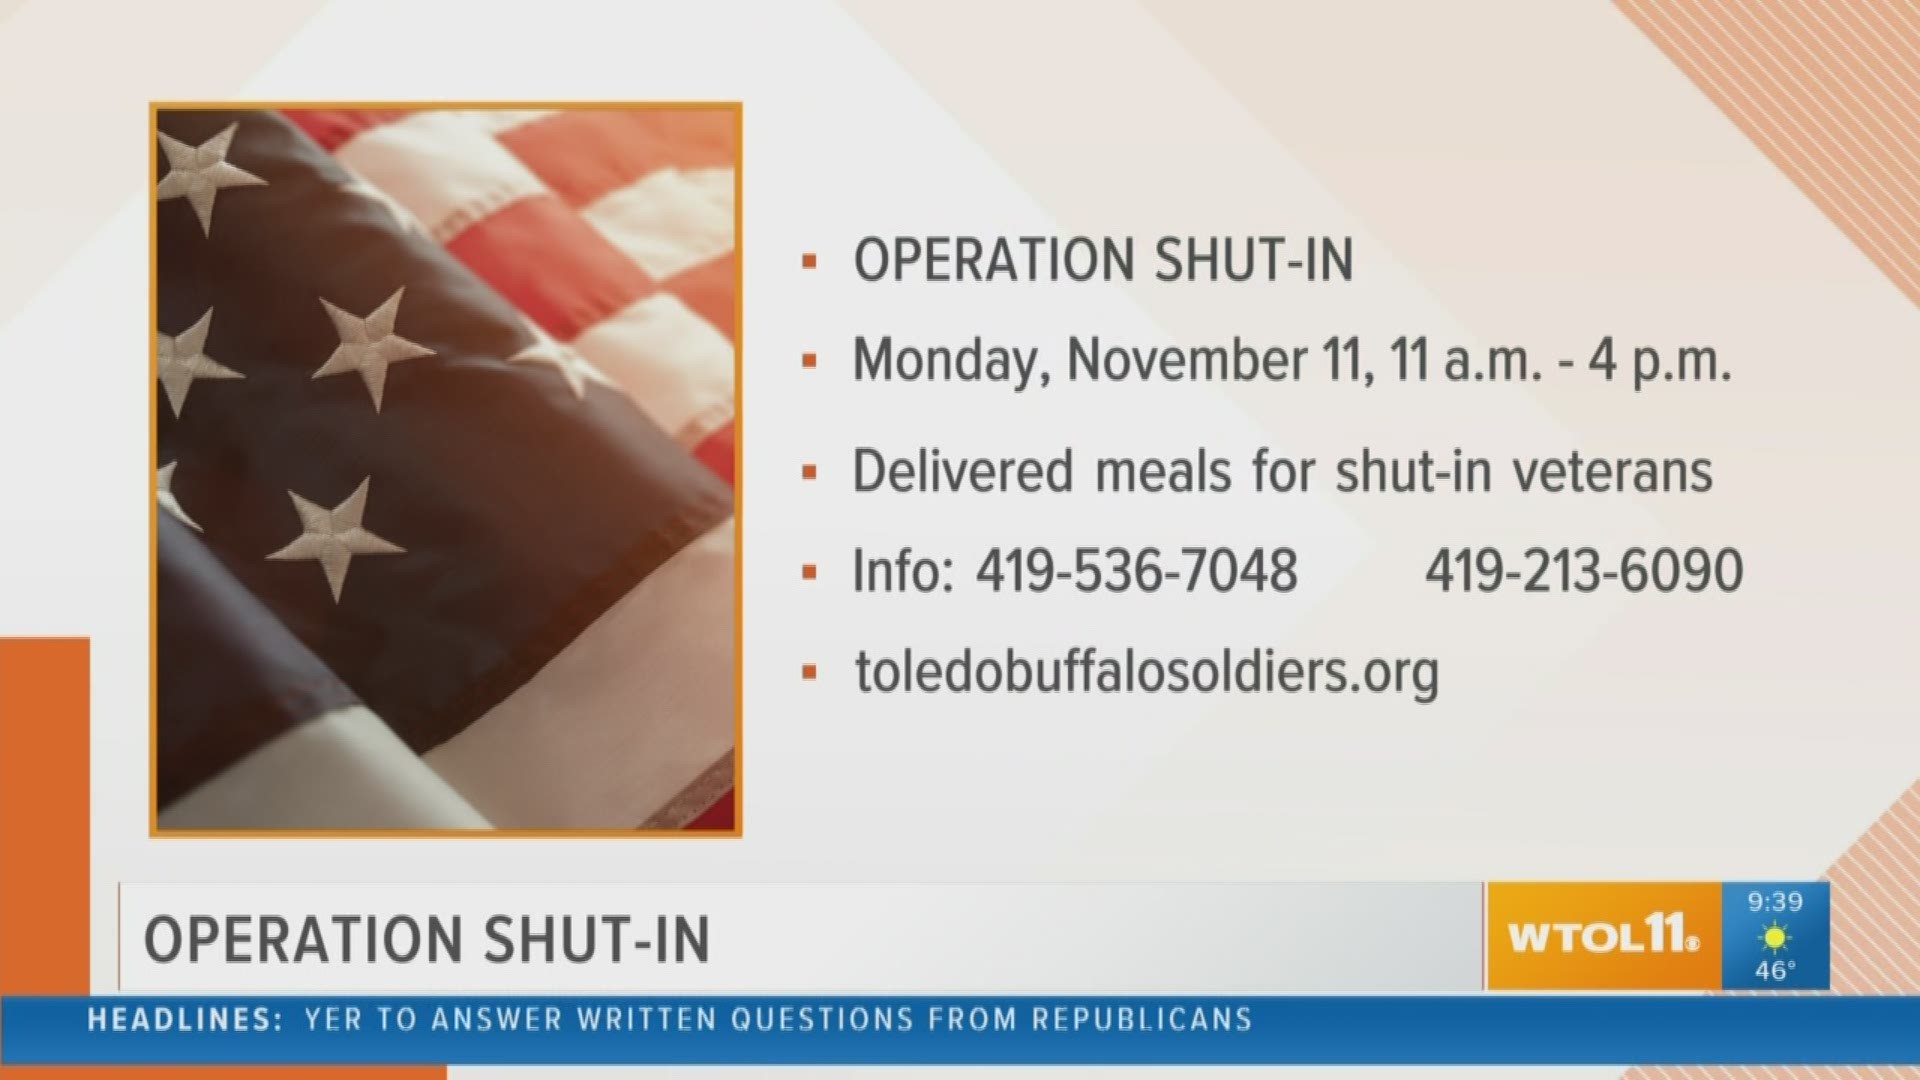 The Buffalo Motorcycle Club has something vets can take advantage of next week: Operation Shut-in, which takes meals to those who can't get out and about!